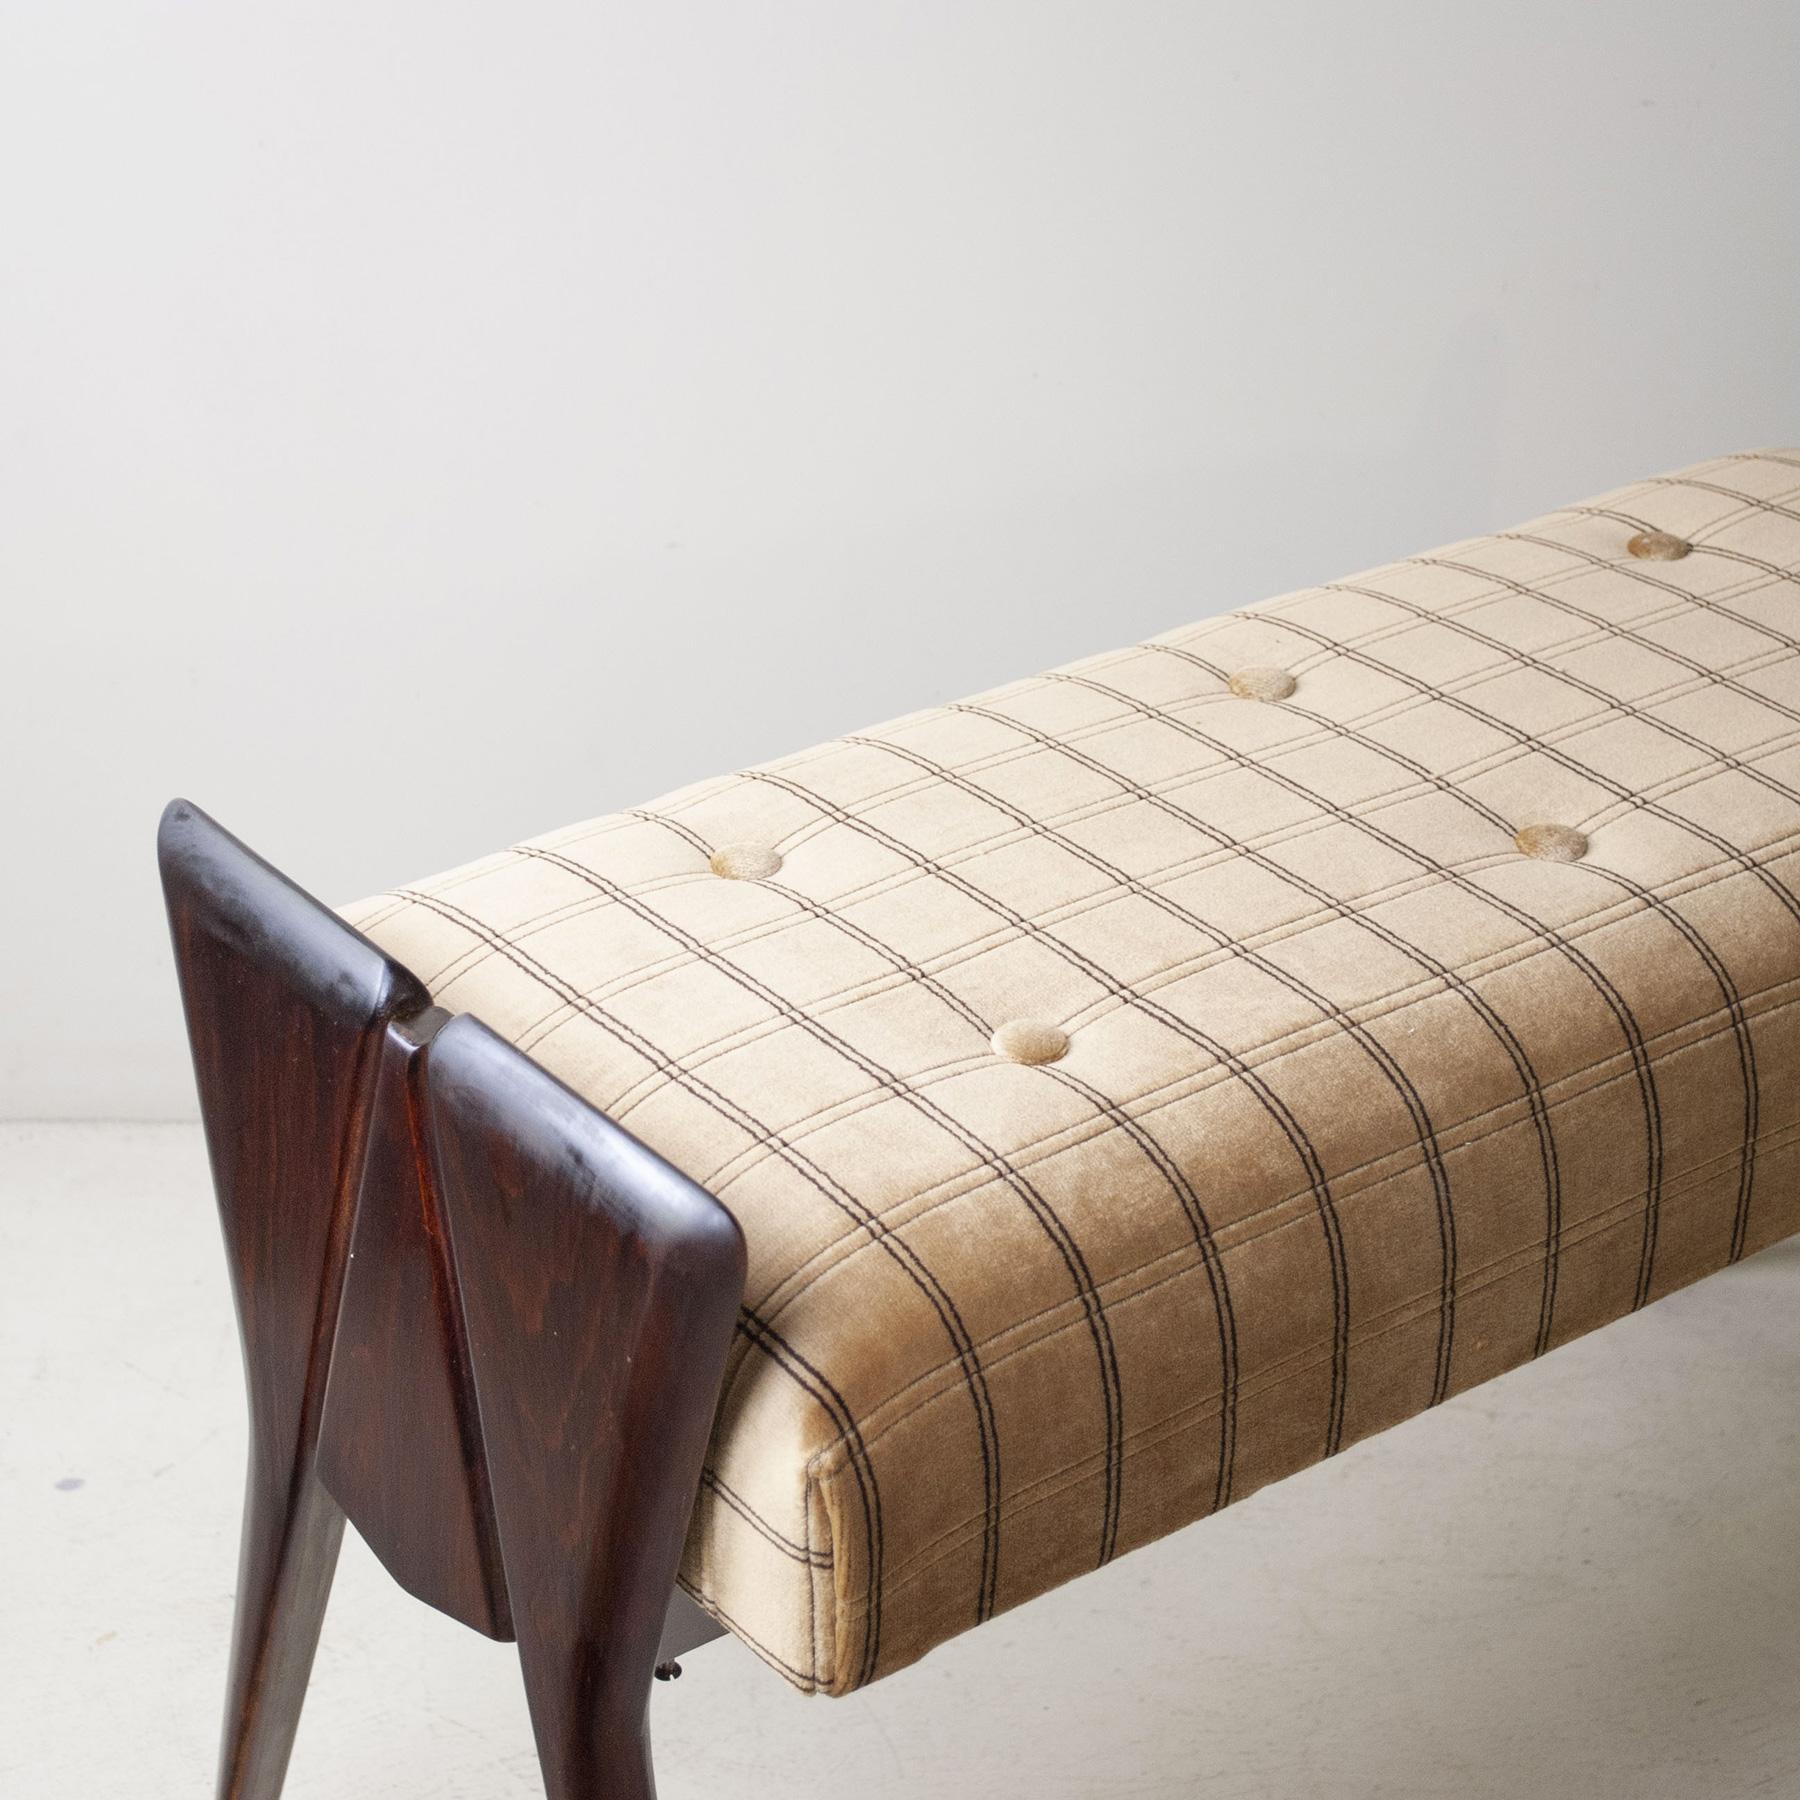 Velvet Ico Parisi Italian Midcentury Bench from the Fifties For Sale